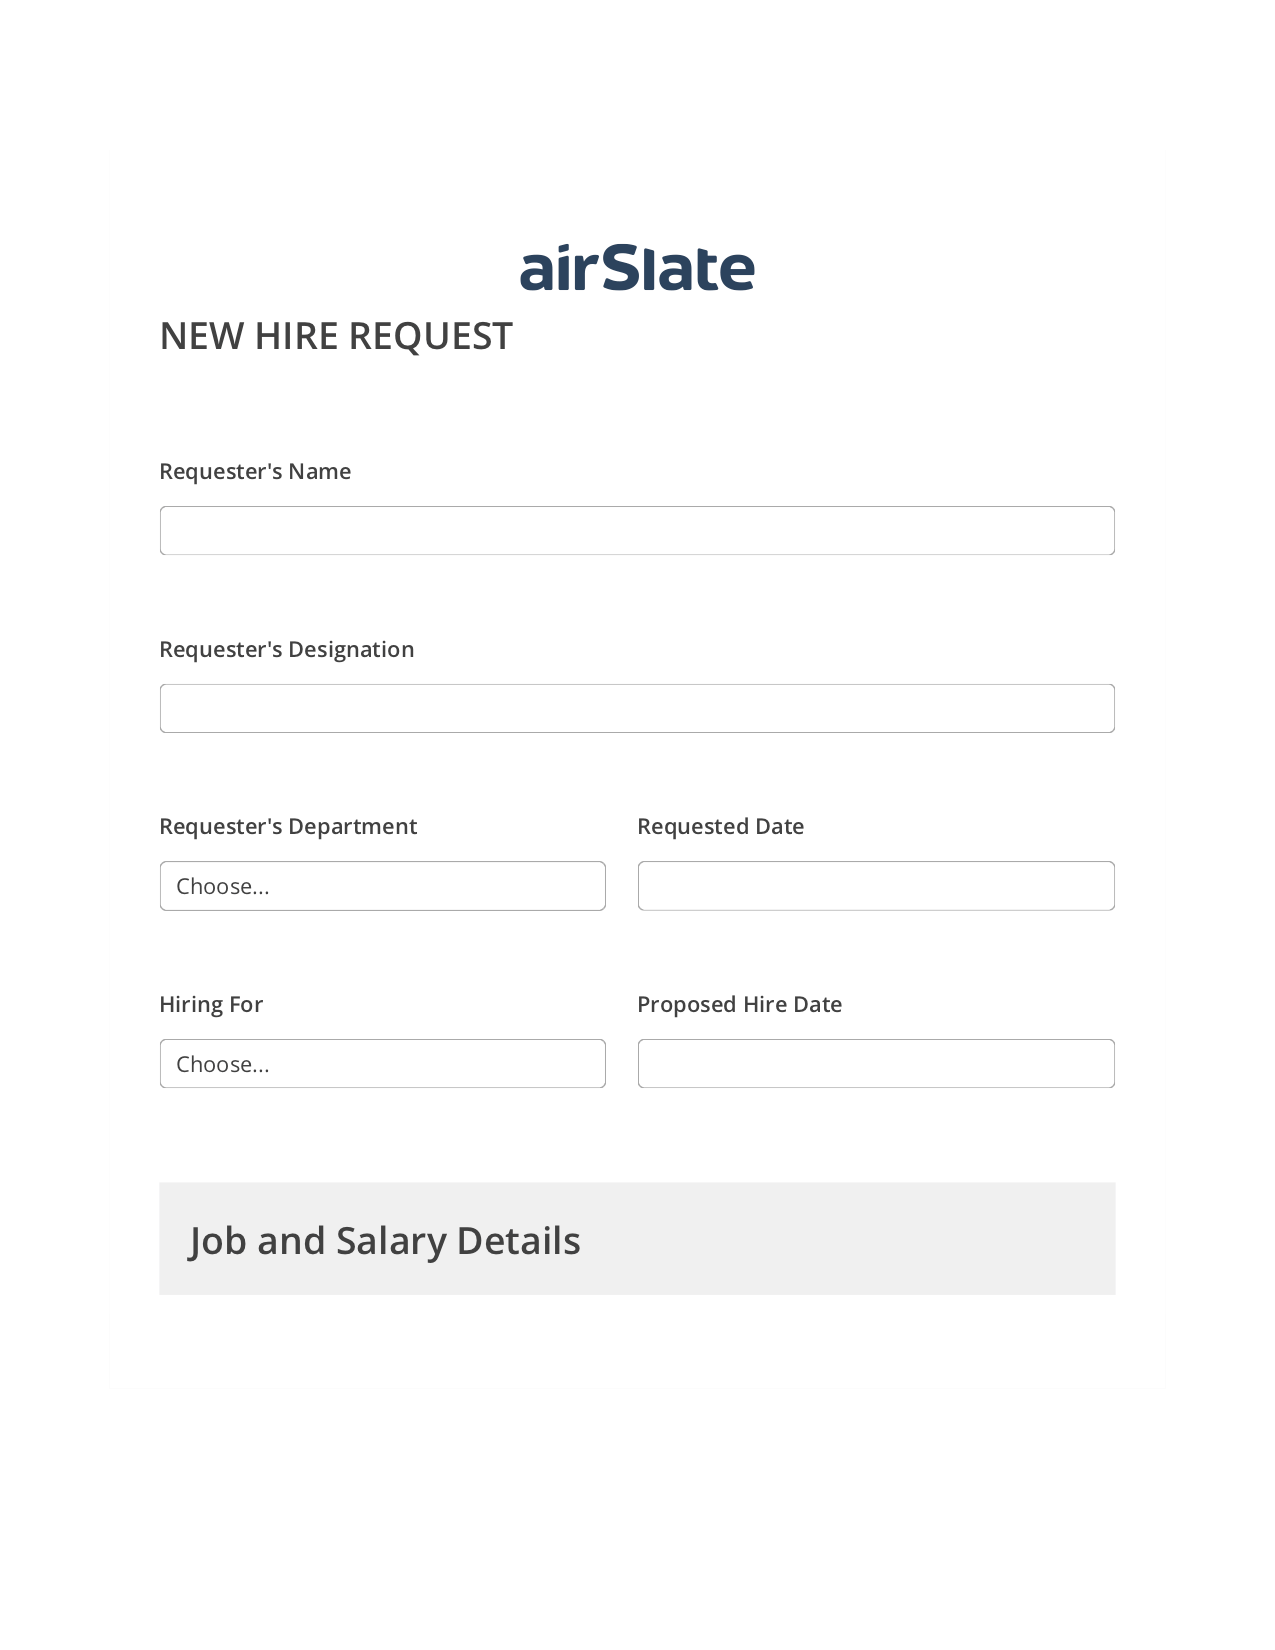 Hiring Request Flow Pre-fill from Salesforce Record Bot